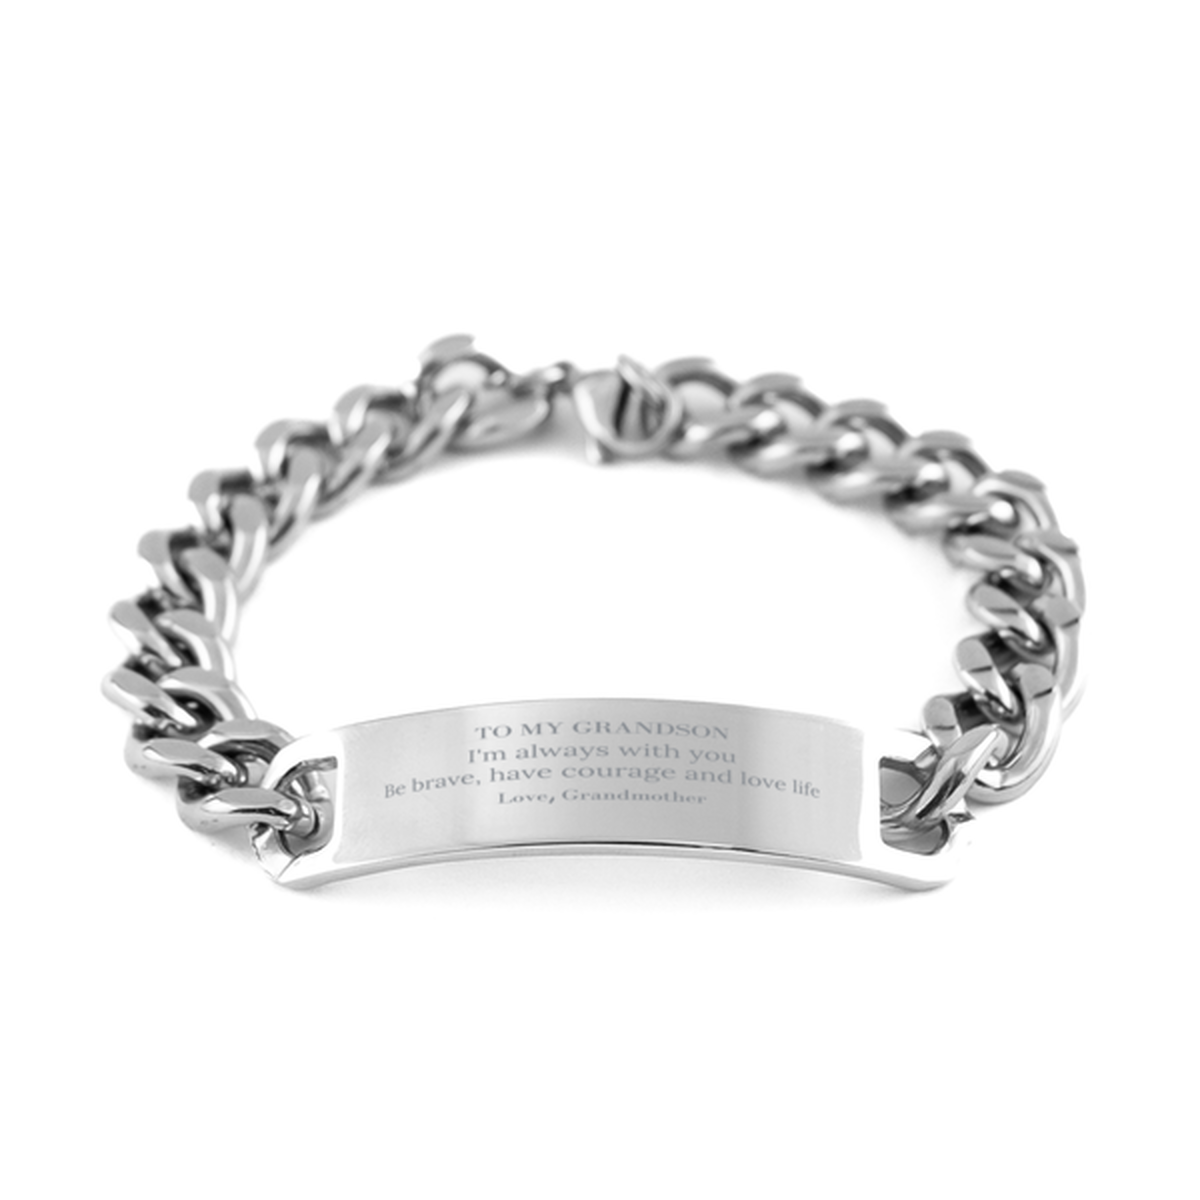 To My Grandson Gifts from Grandmother, Unique Cuban Chain Stainless Steel Bracelet Inspirational Christmas Birthday Graduation Gifts for Grandson I'm always with you. Be brave, have courage and love life. Love, Grandmother